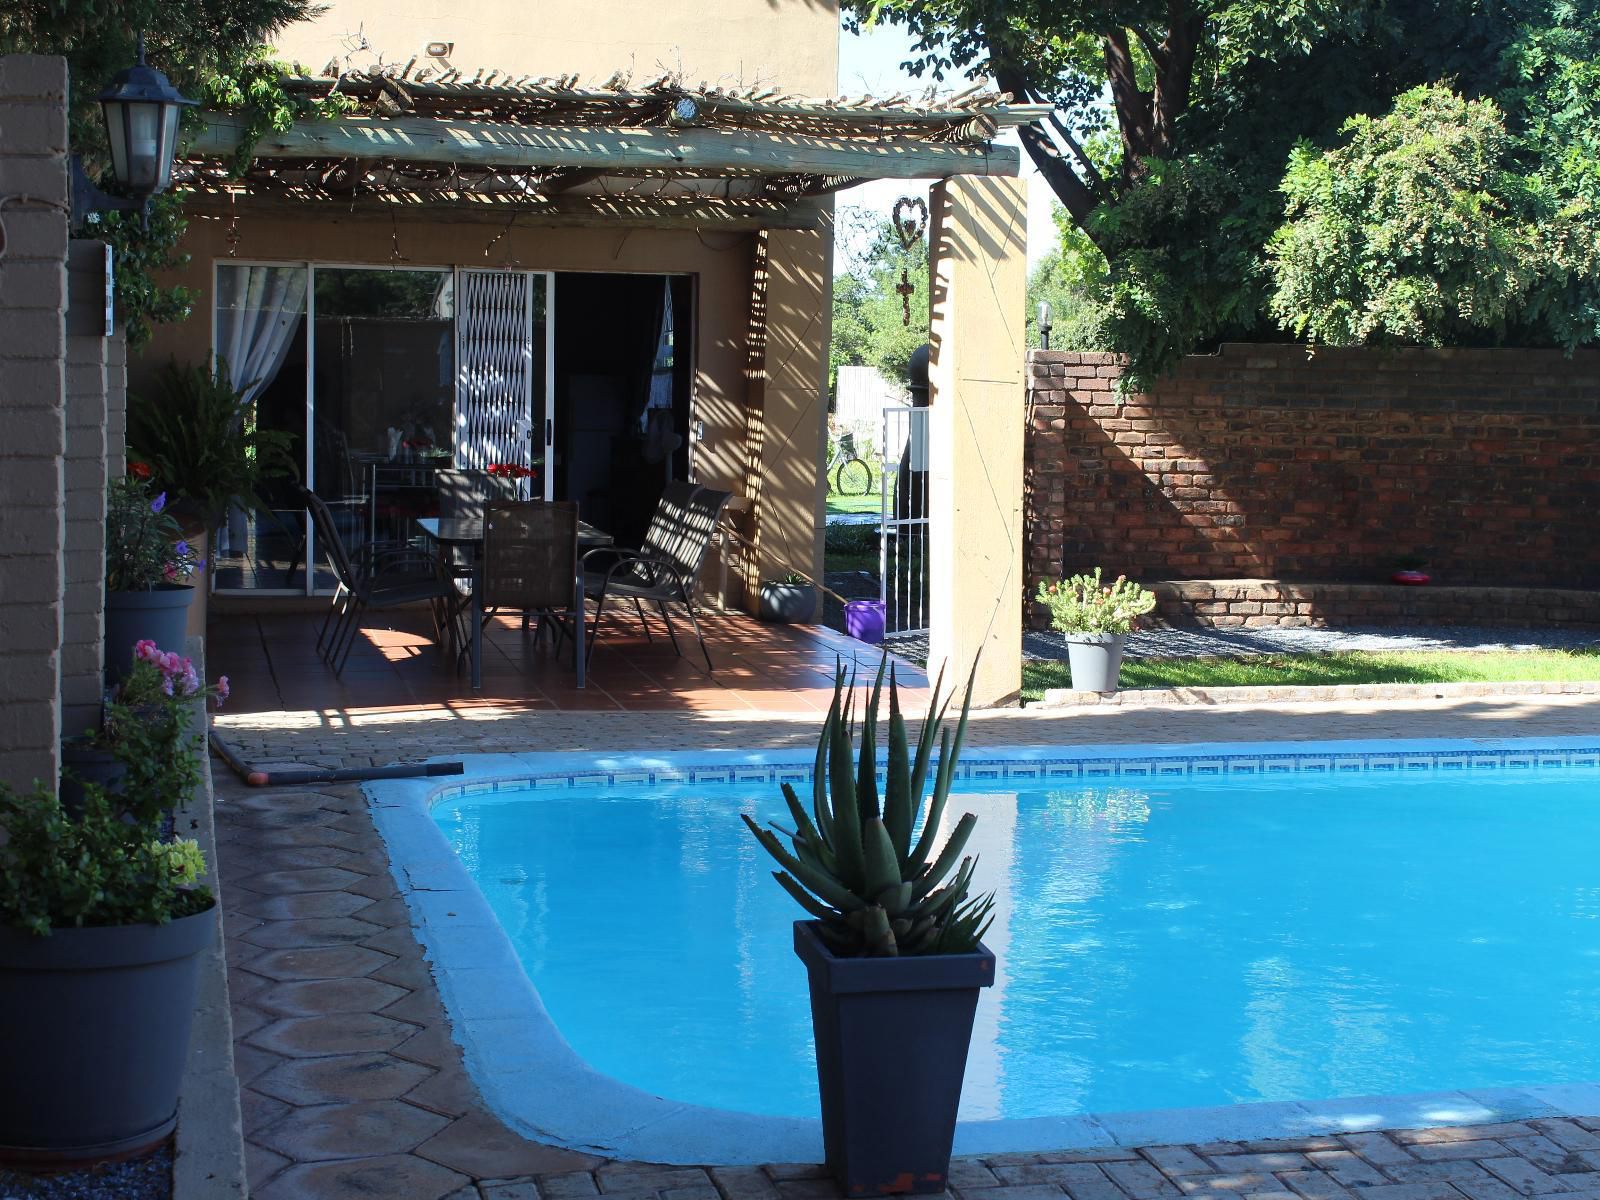 Serendipity Guest House Danielskuil Northern Cape South Africa House, Building, Architecture, Garden, Nature, Plant, Swimming Pool